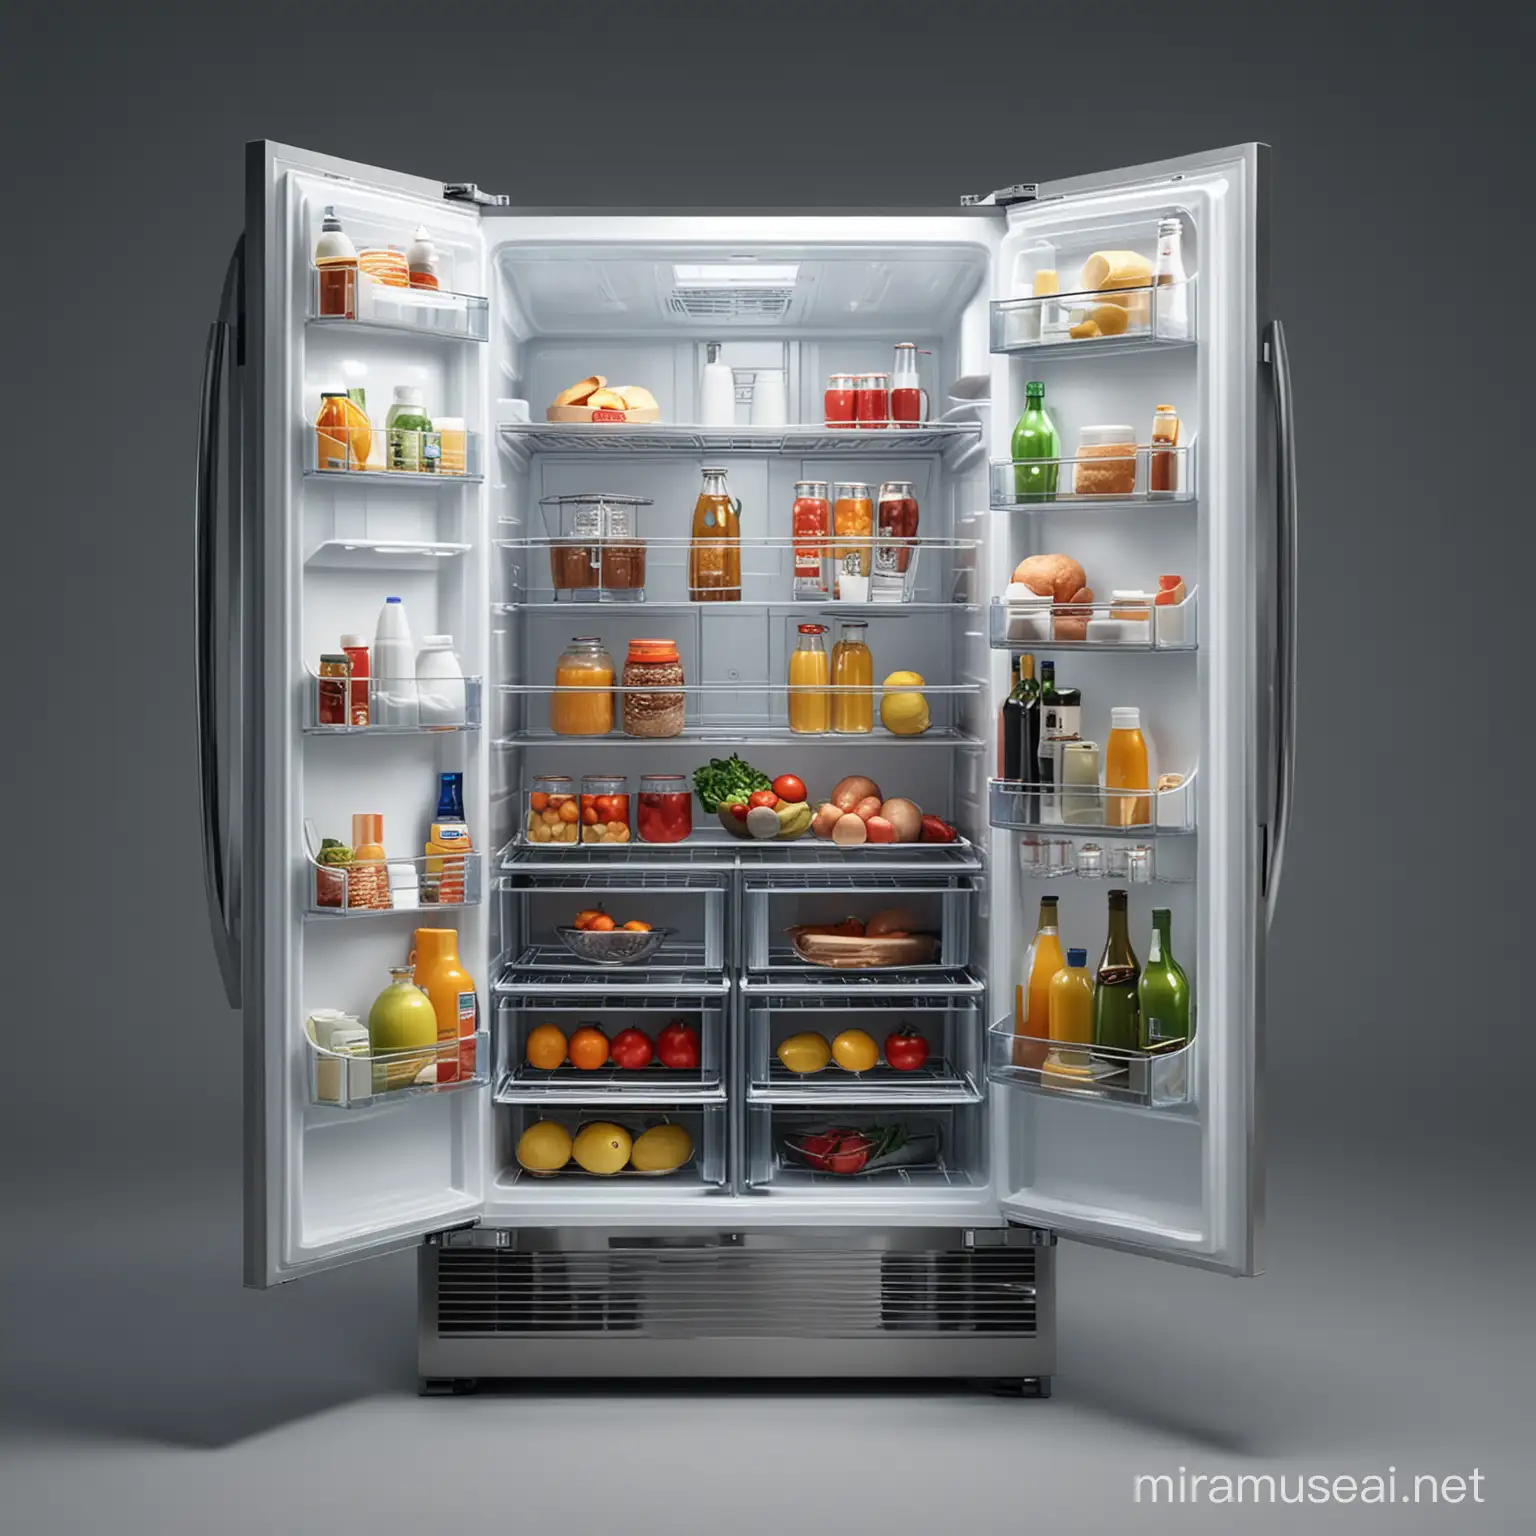 full frontal view of the open photorealistic refrigerator in the night kitchen